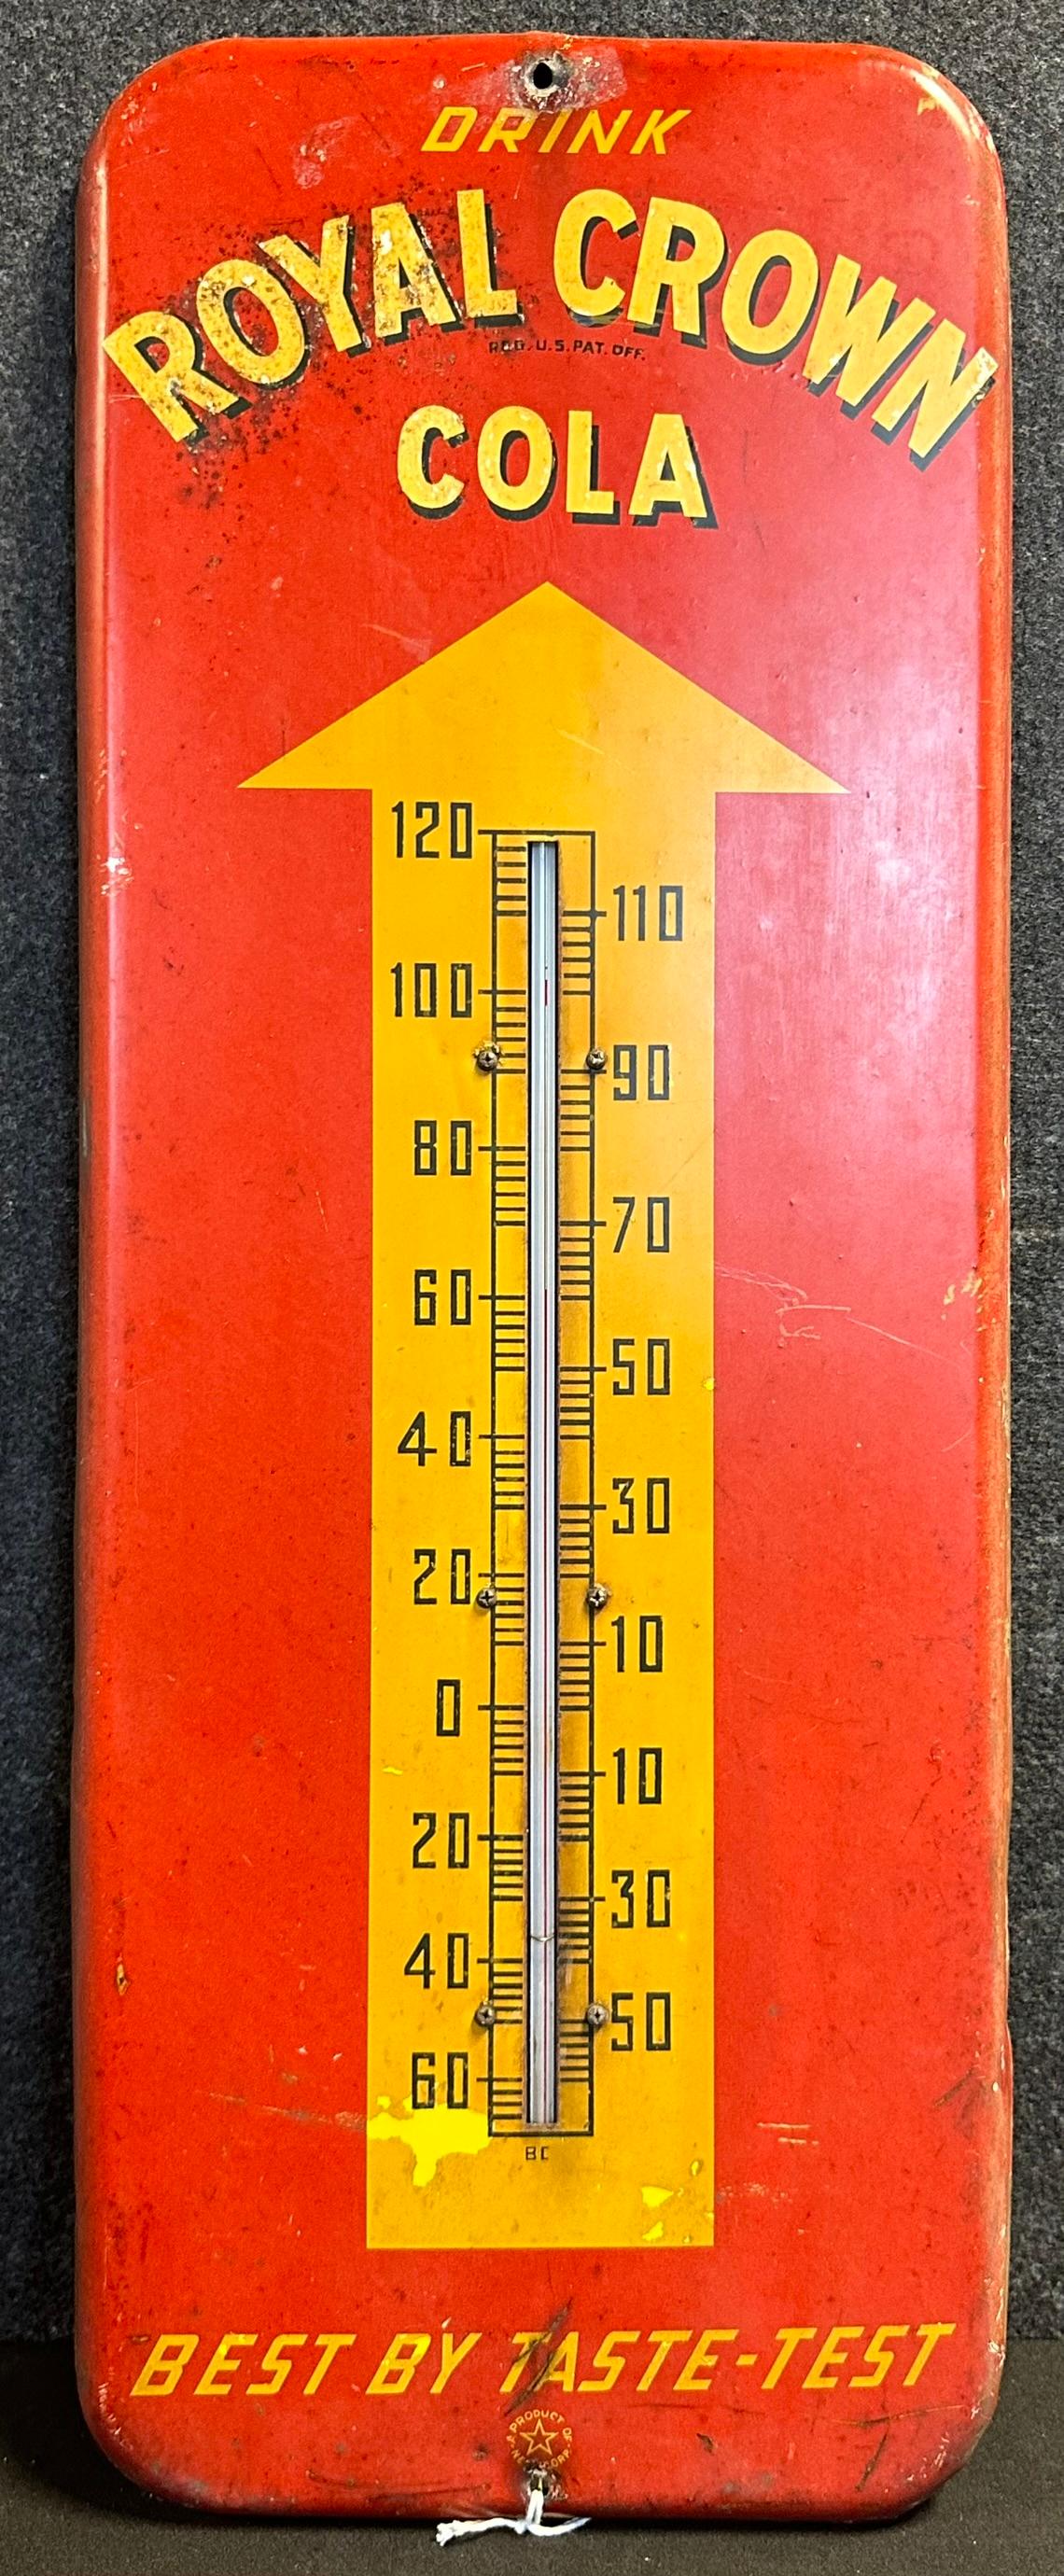 Royal Crown 1950s Painted Metal Advertising Soda Pop Thermometer Sign